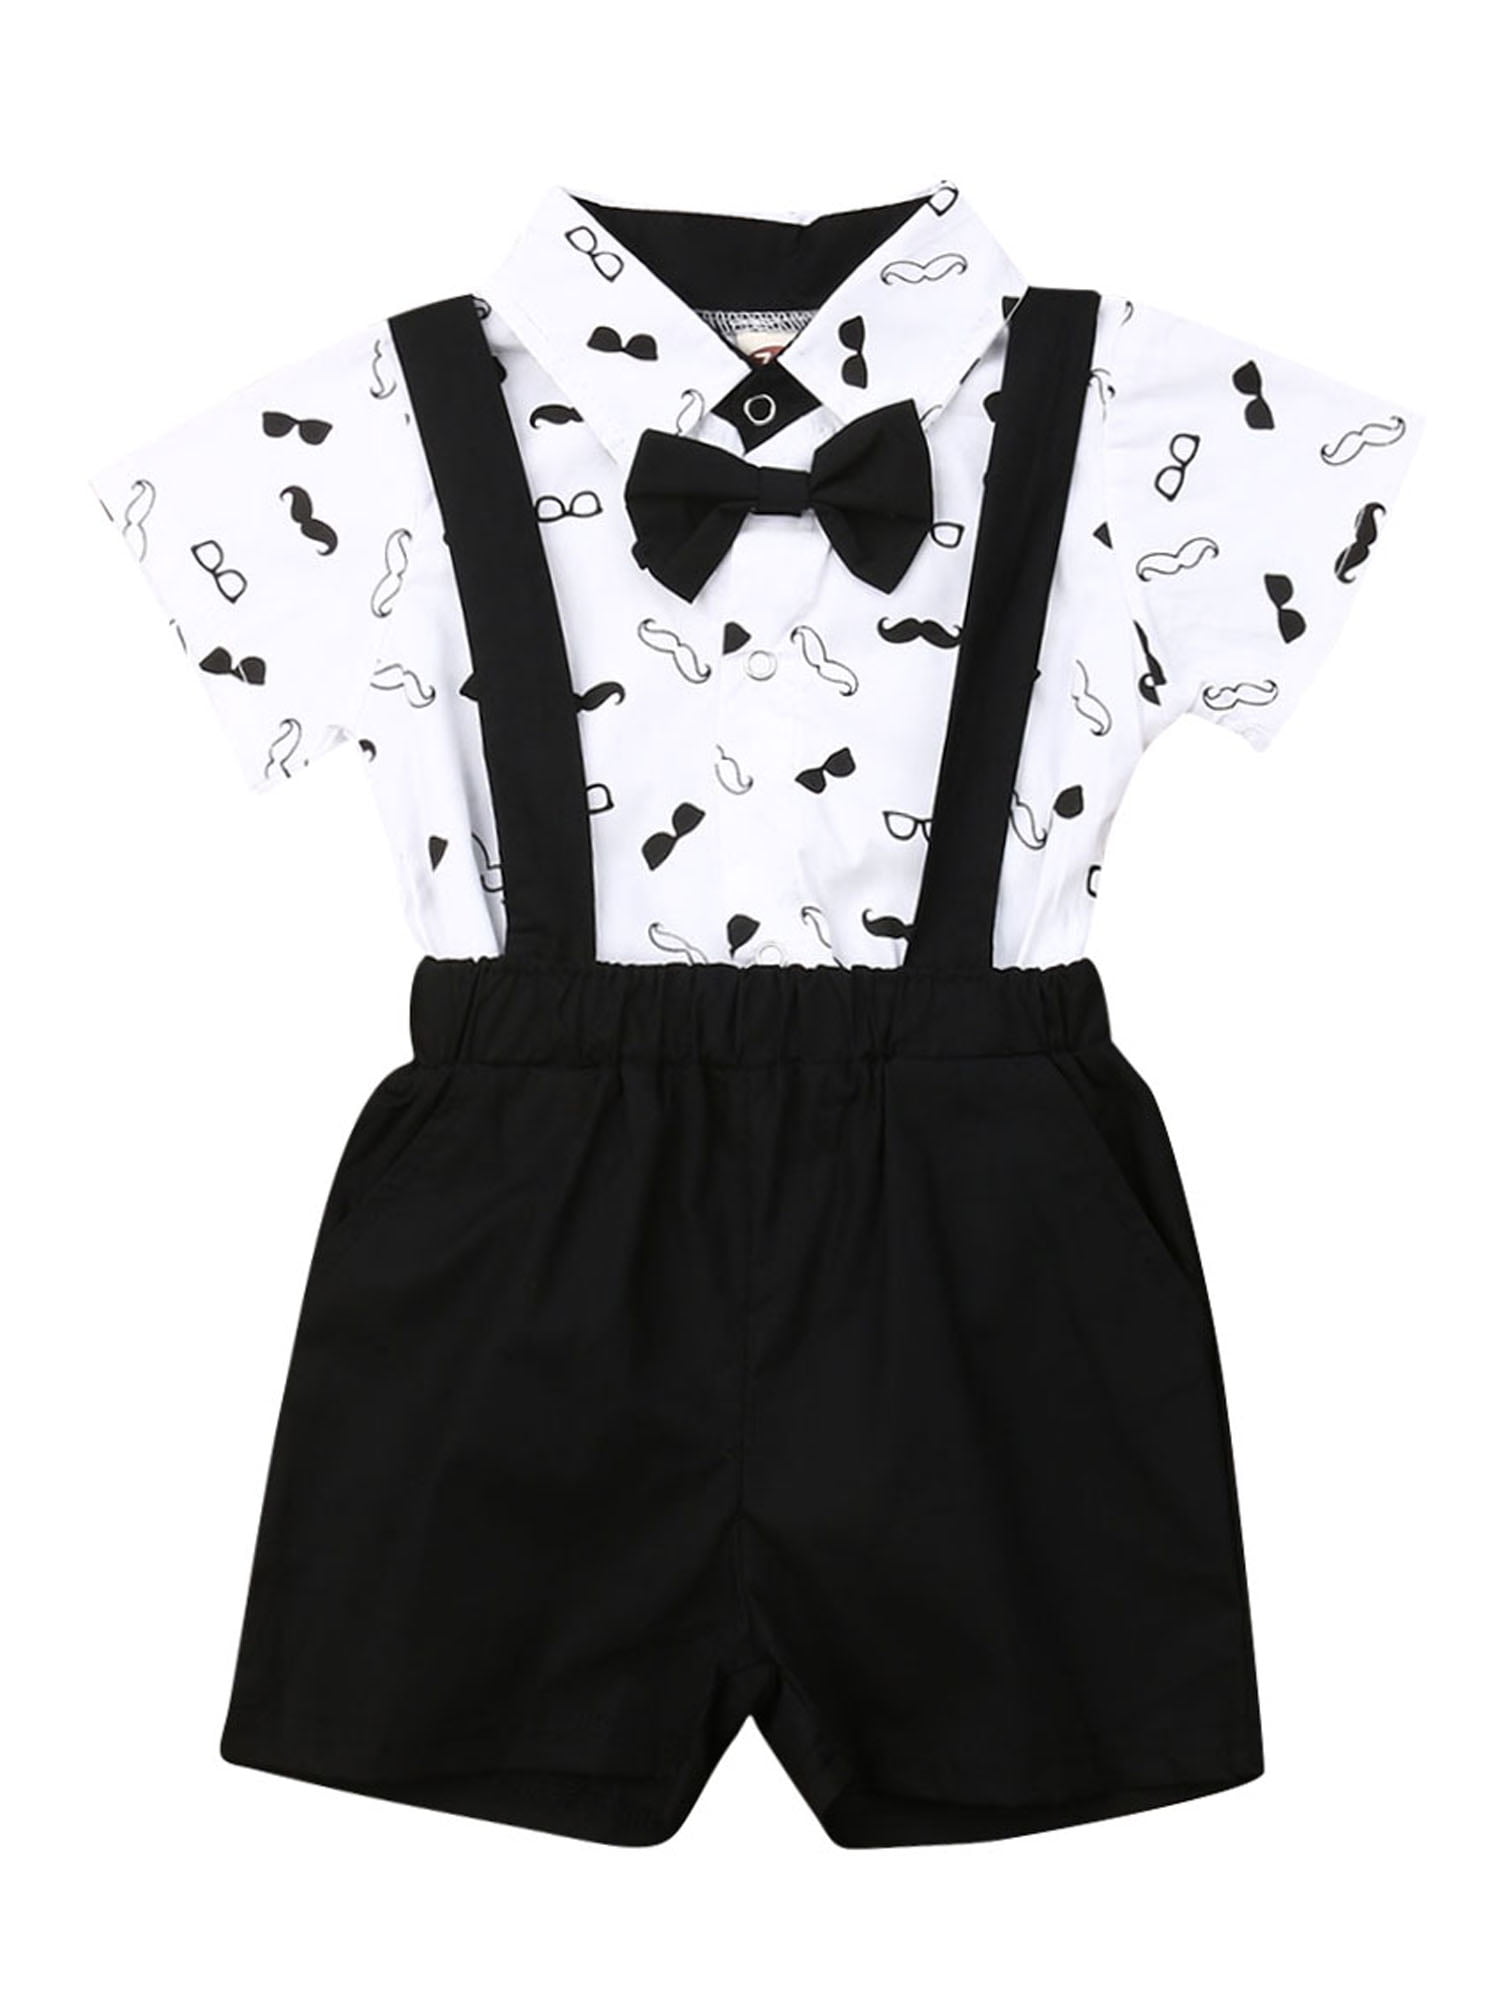 Baby Boy Wedding Christening Formal Party Bow Tie Smart Suit Outfit Tuxedo 3-24m 